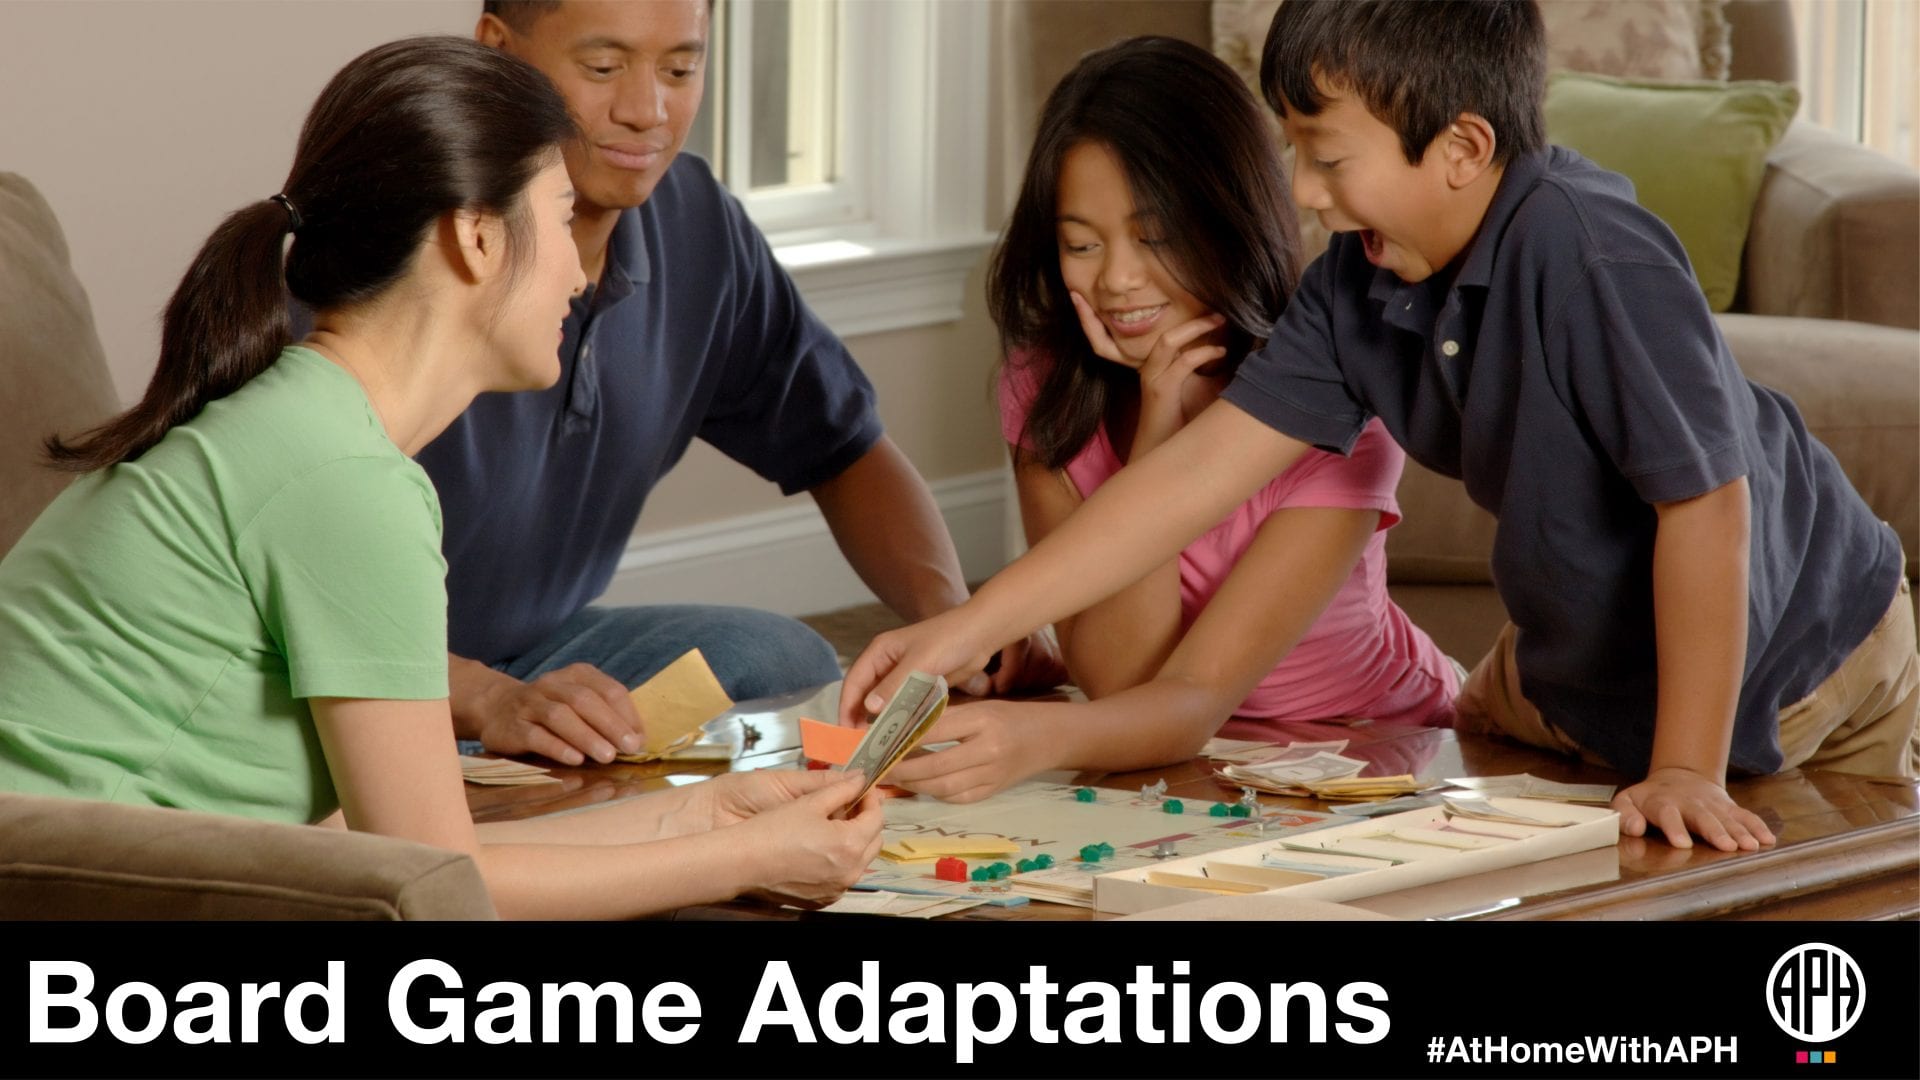 a family sitting around playing a board game and smiling. text reads "Board Game Adaptations #AtHomeWithAPH"